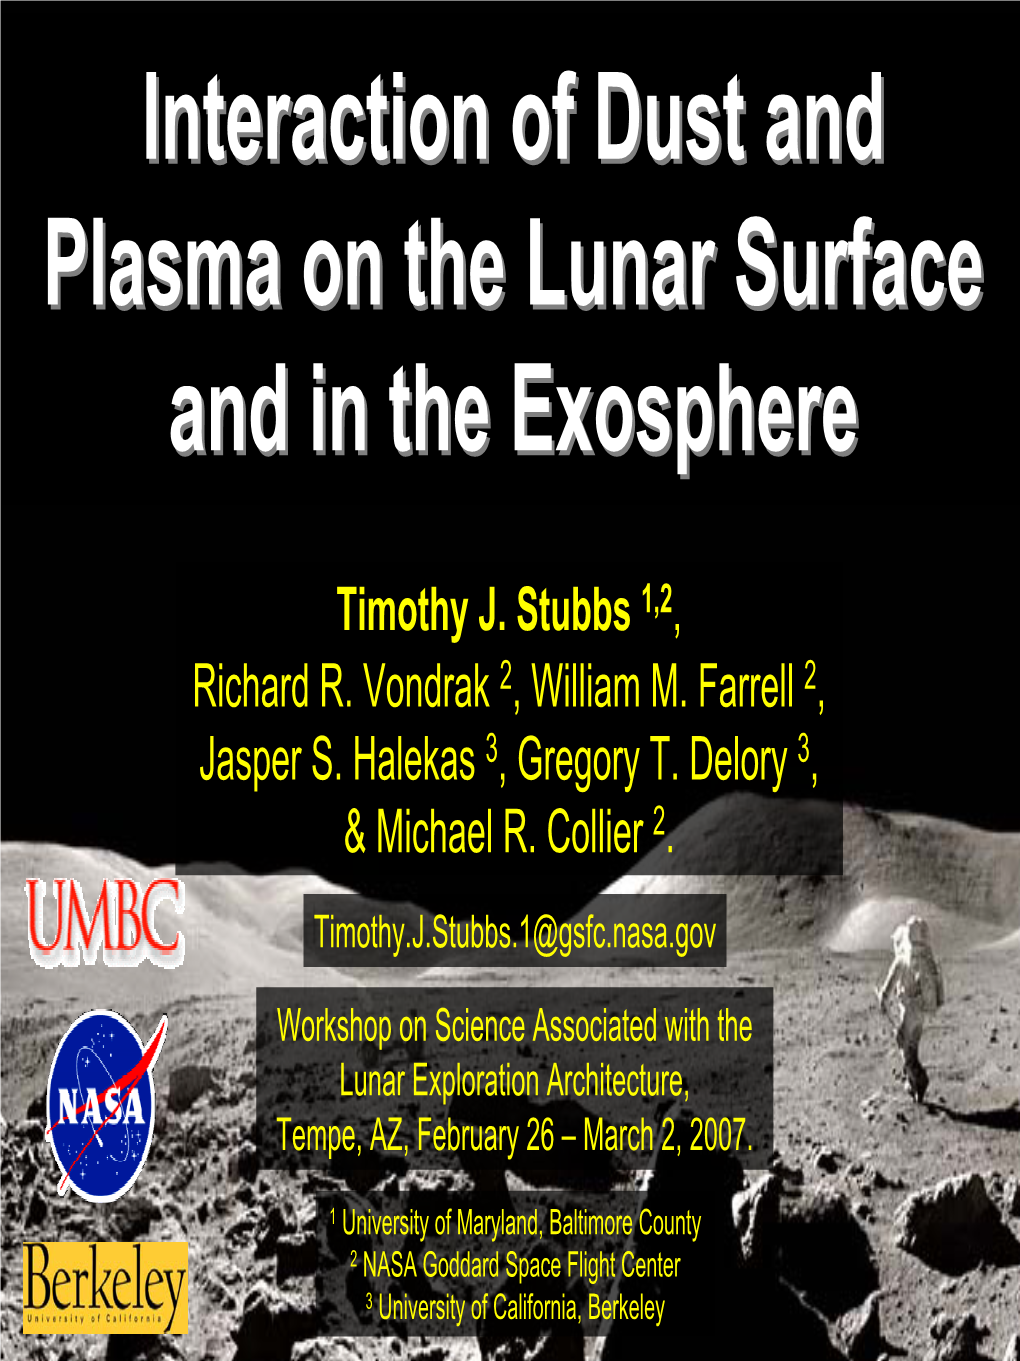 Interaction of Dust and Plasma on the Moon and Exosphere